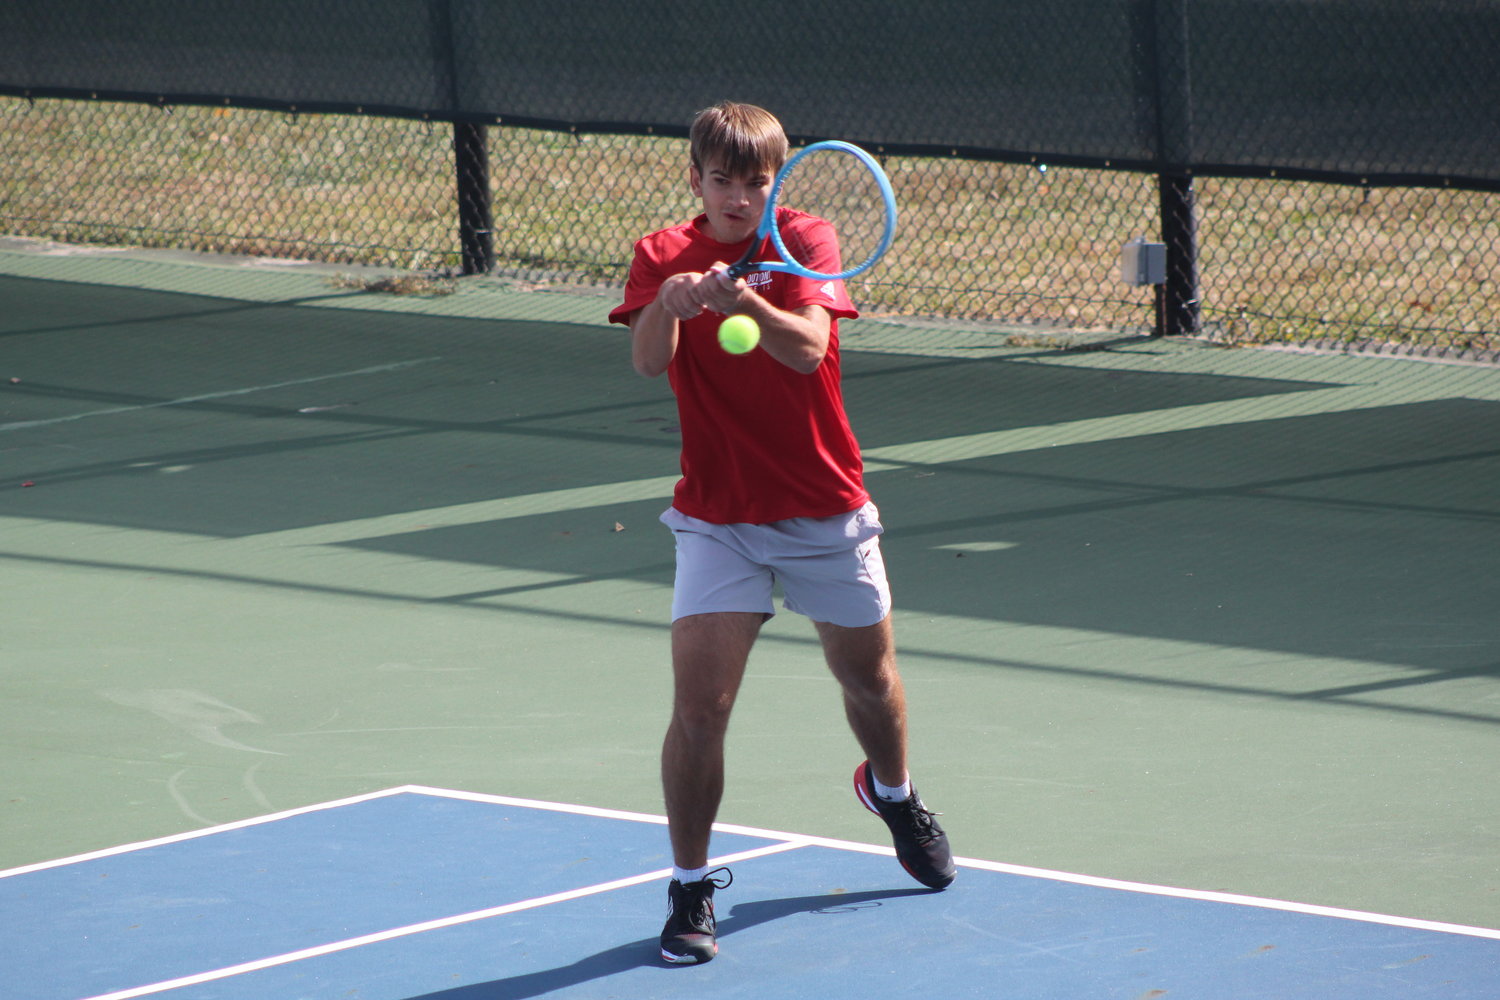 Southmont’s Adam Cox is one of only two players in county history to qualify for the IHSAA State Finals. The senior capped off a stellar career where he ended his senior season 23-1 overall.